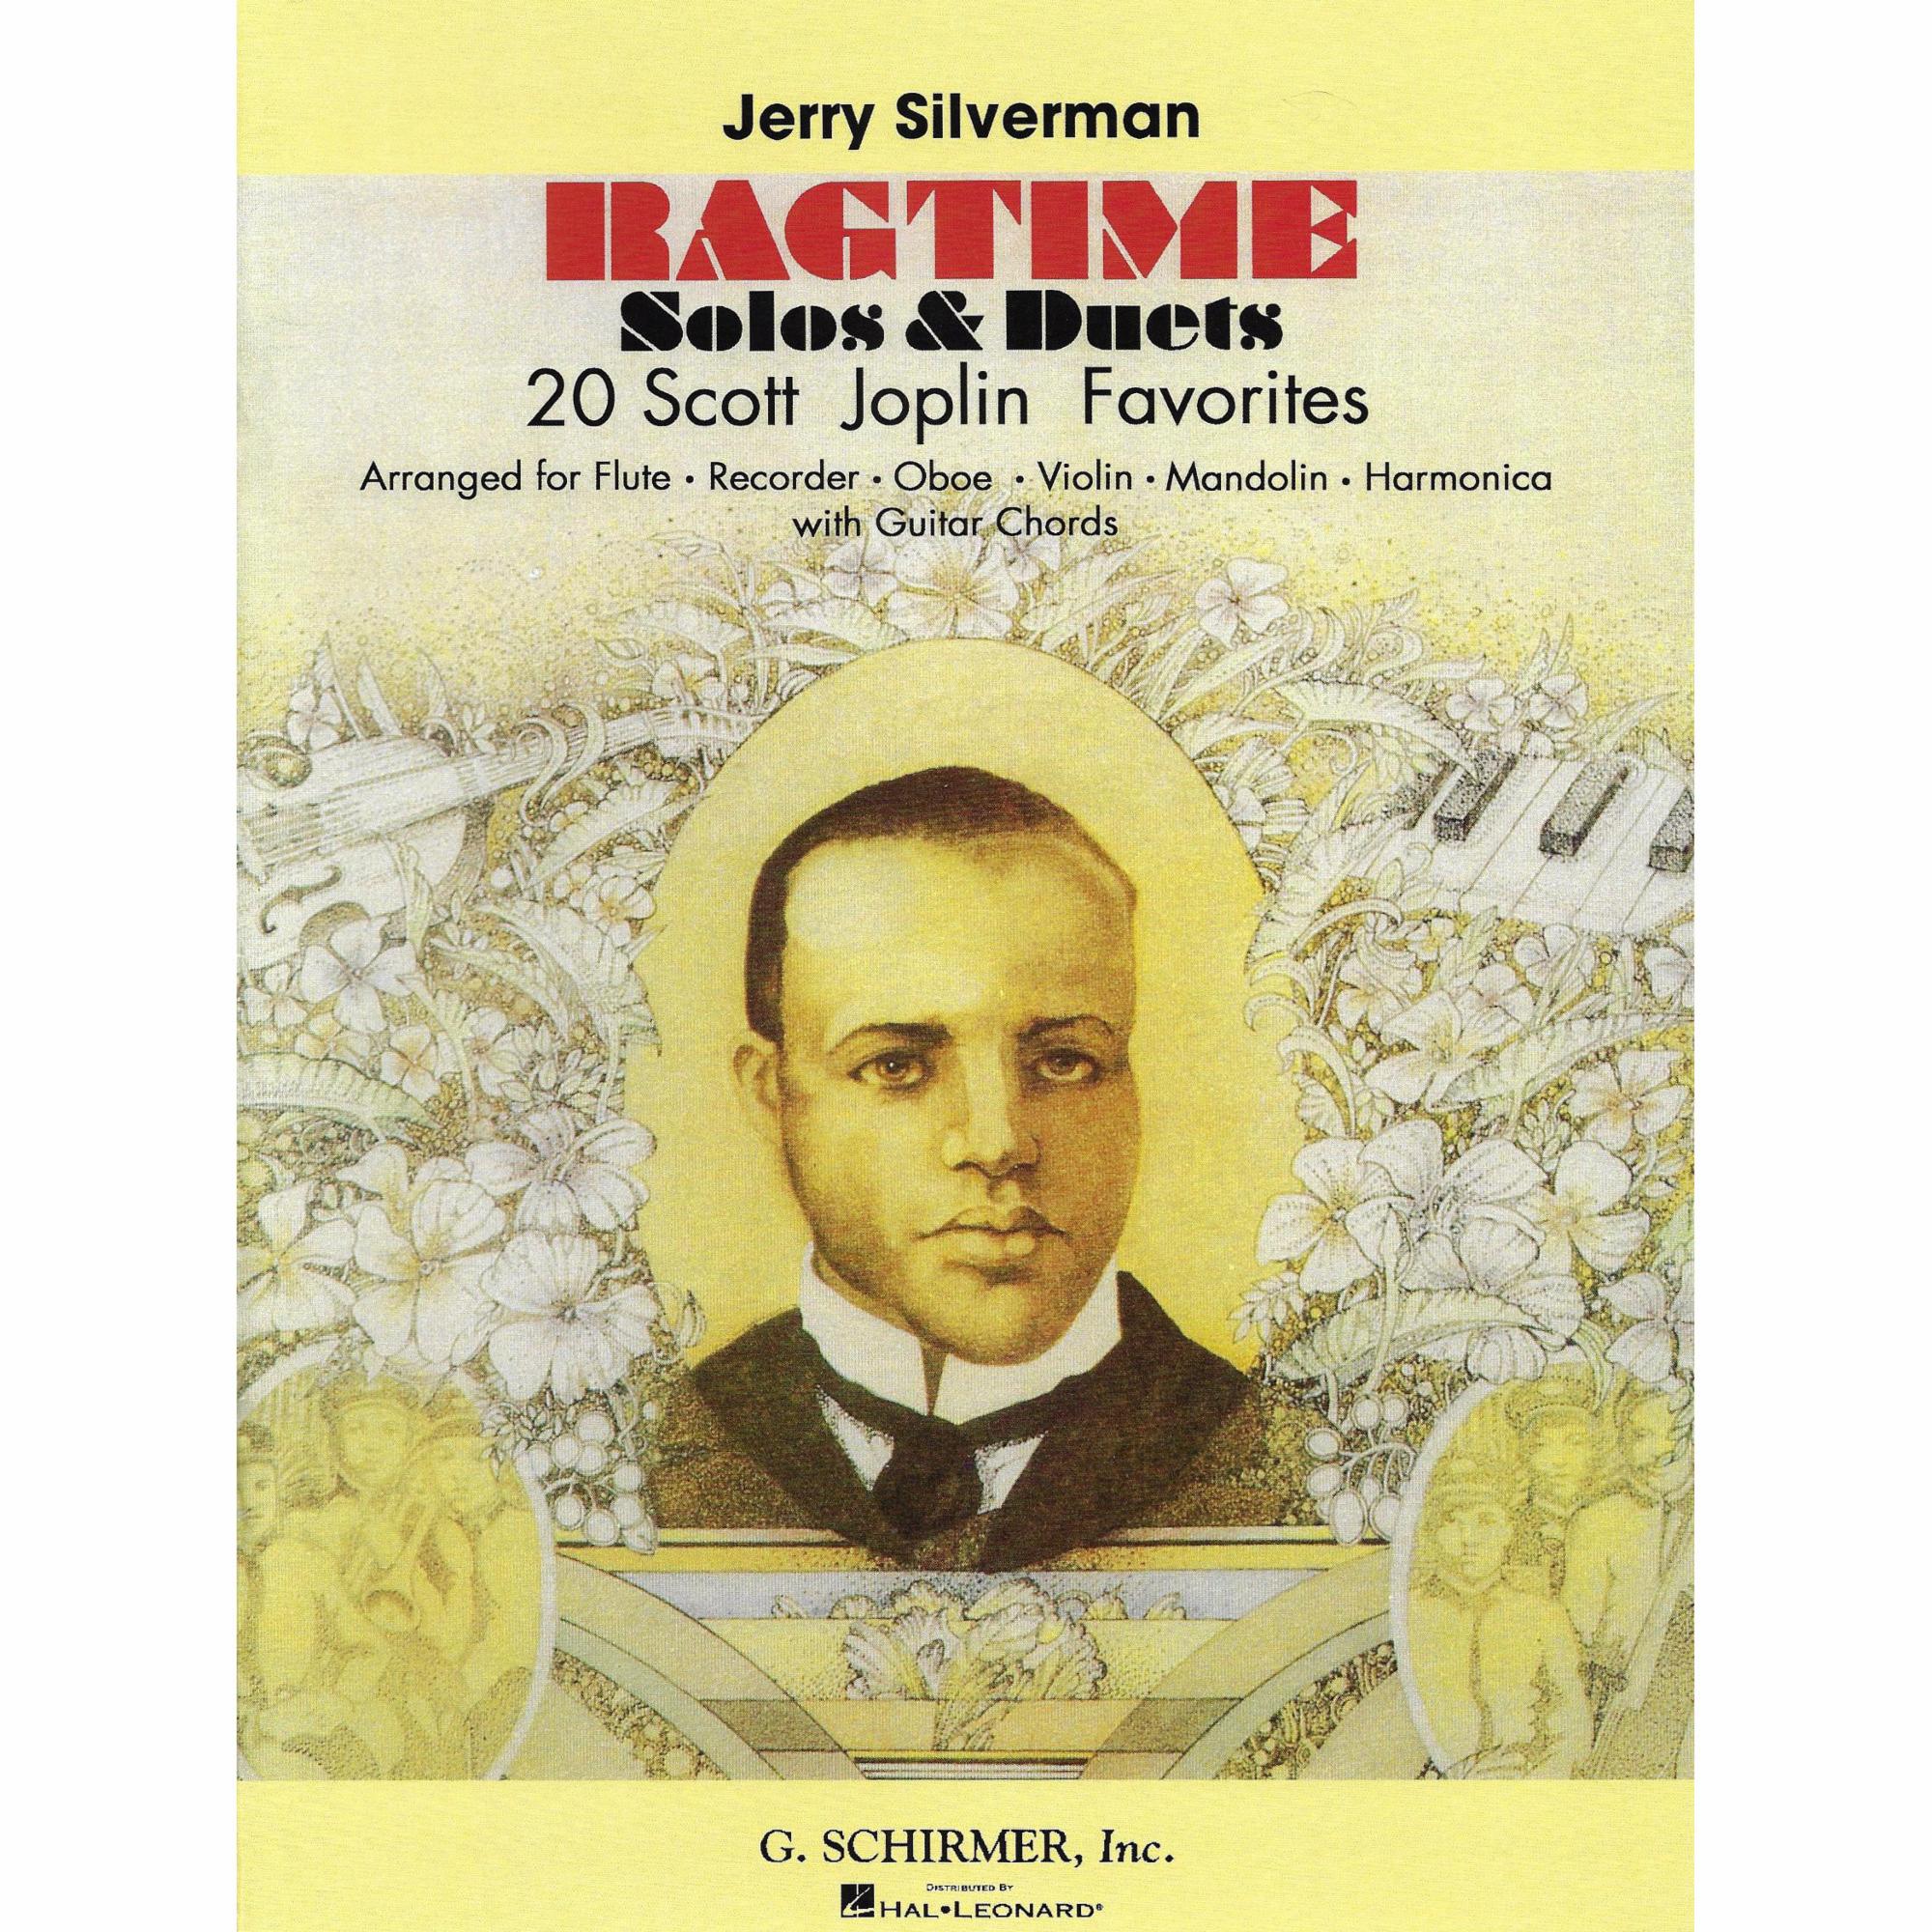 Ragtime Solos & Duets for Violin